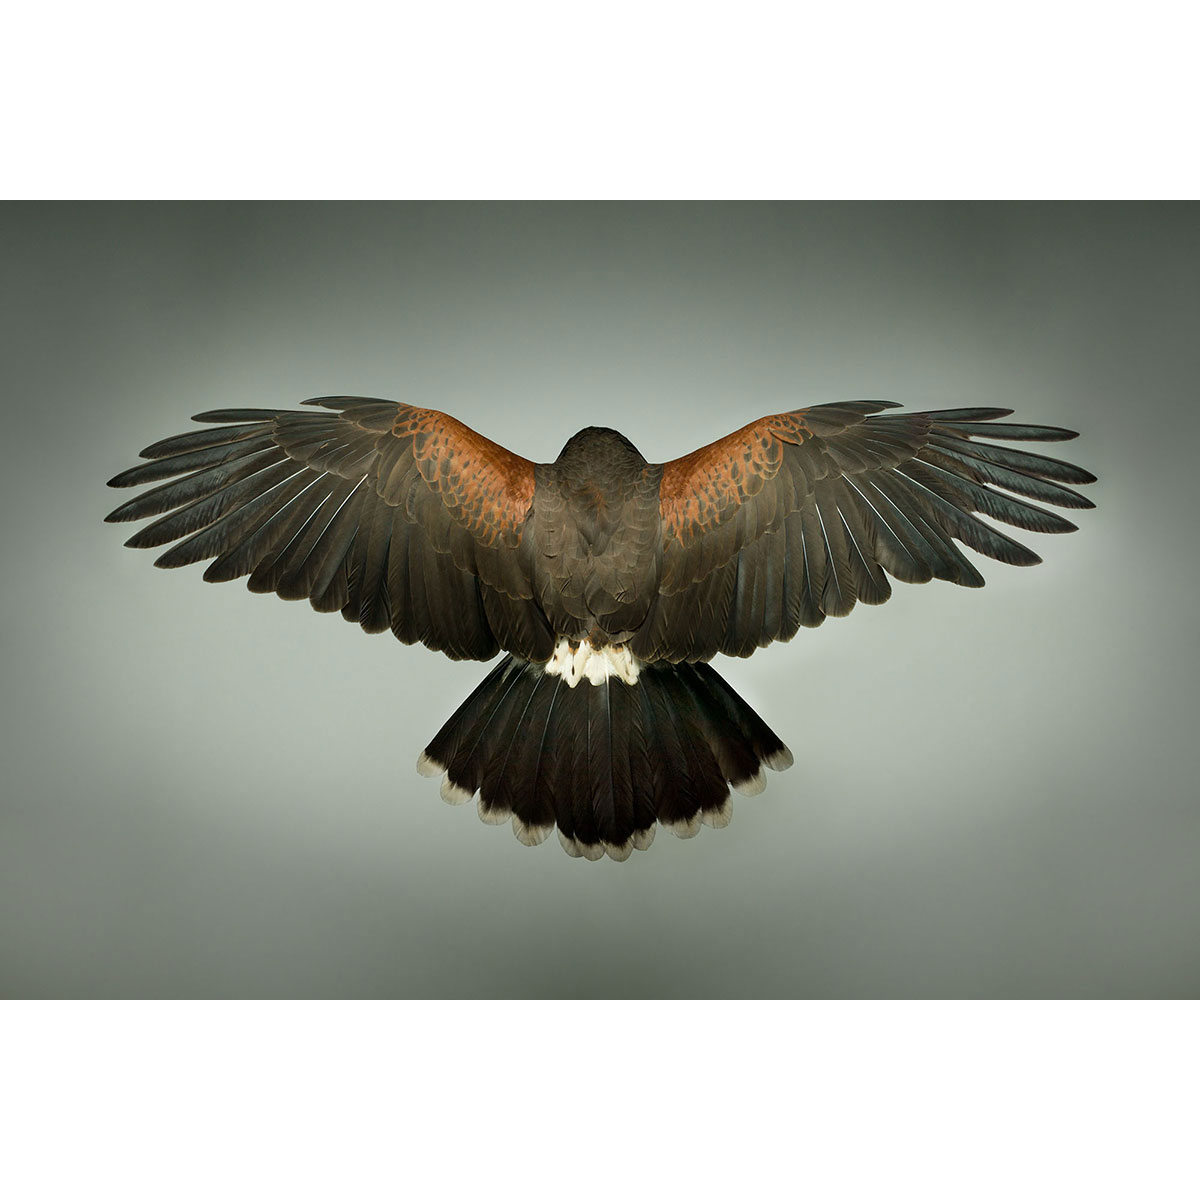 Mark-Harvey-photography_In-Flight-collection-HARRIS-HAWK_lowres